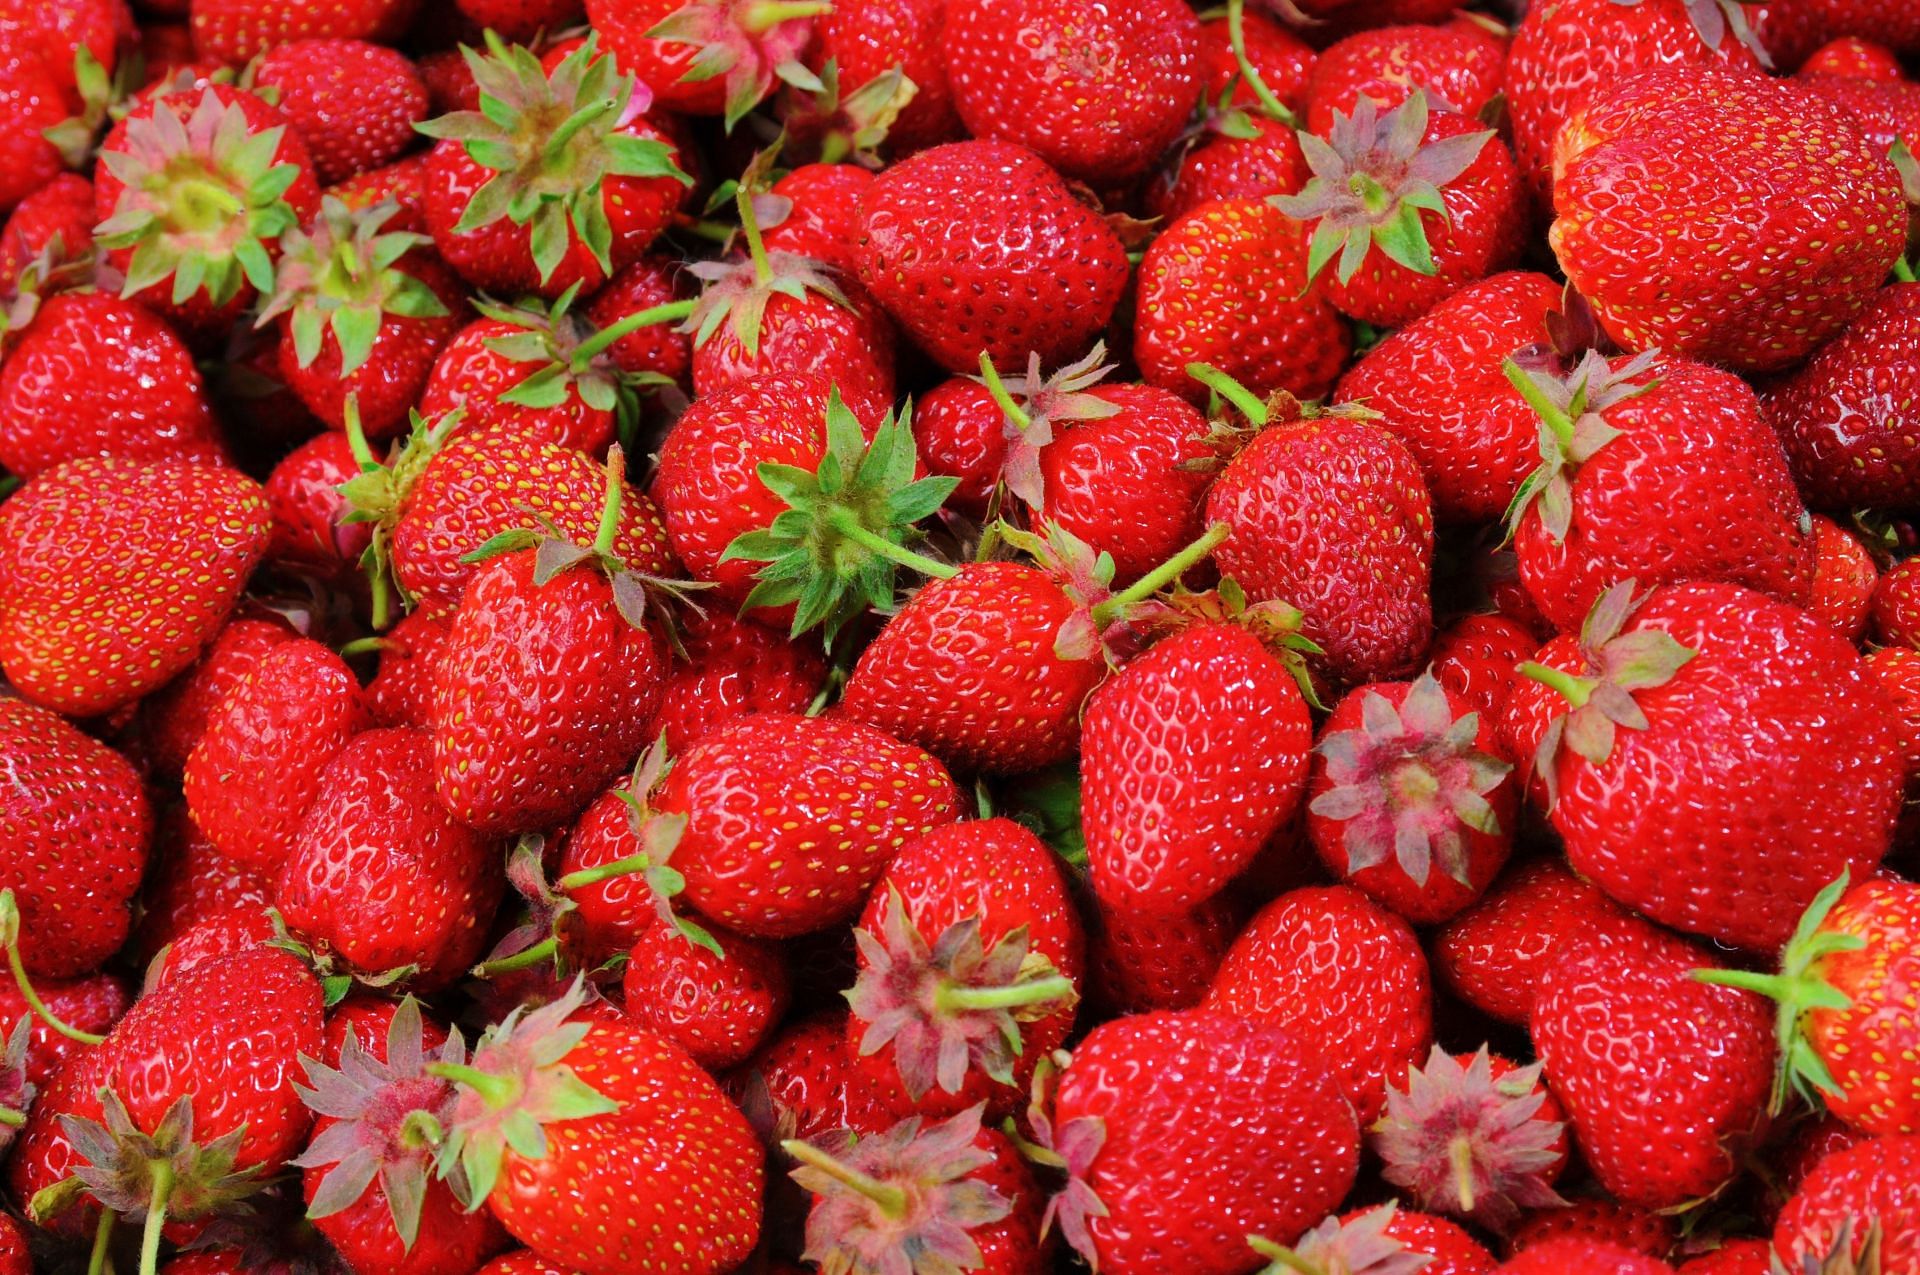 Strawberries are one of the healthiest fruits you can eat, being rich in vitamin C and antioxidants (Image via Pexels @Pixabay)